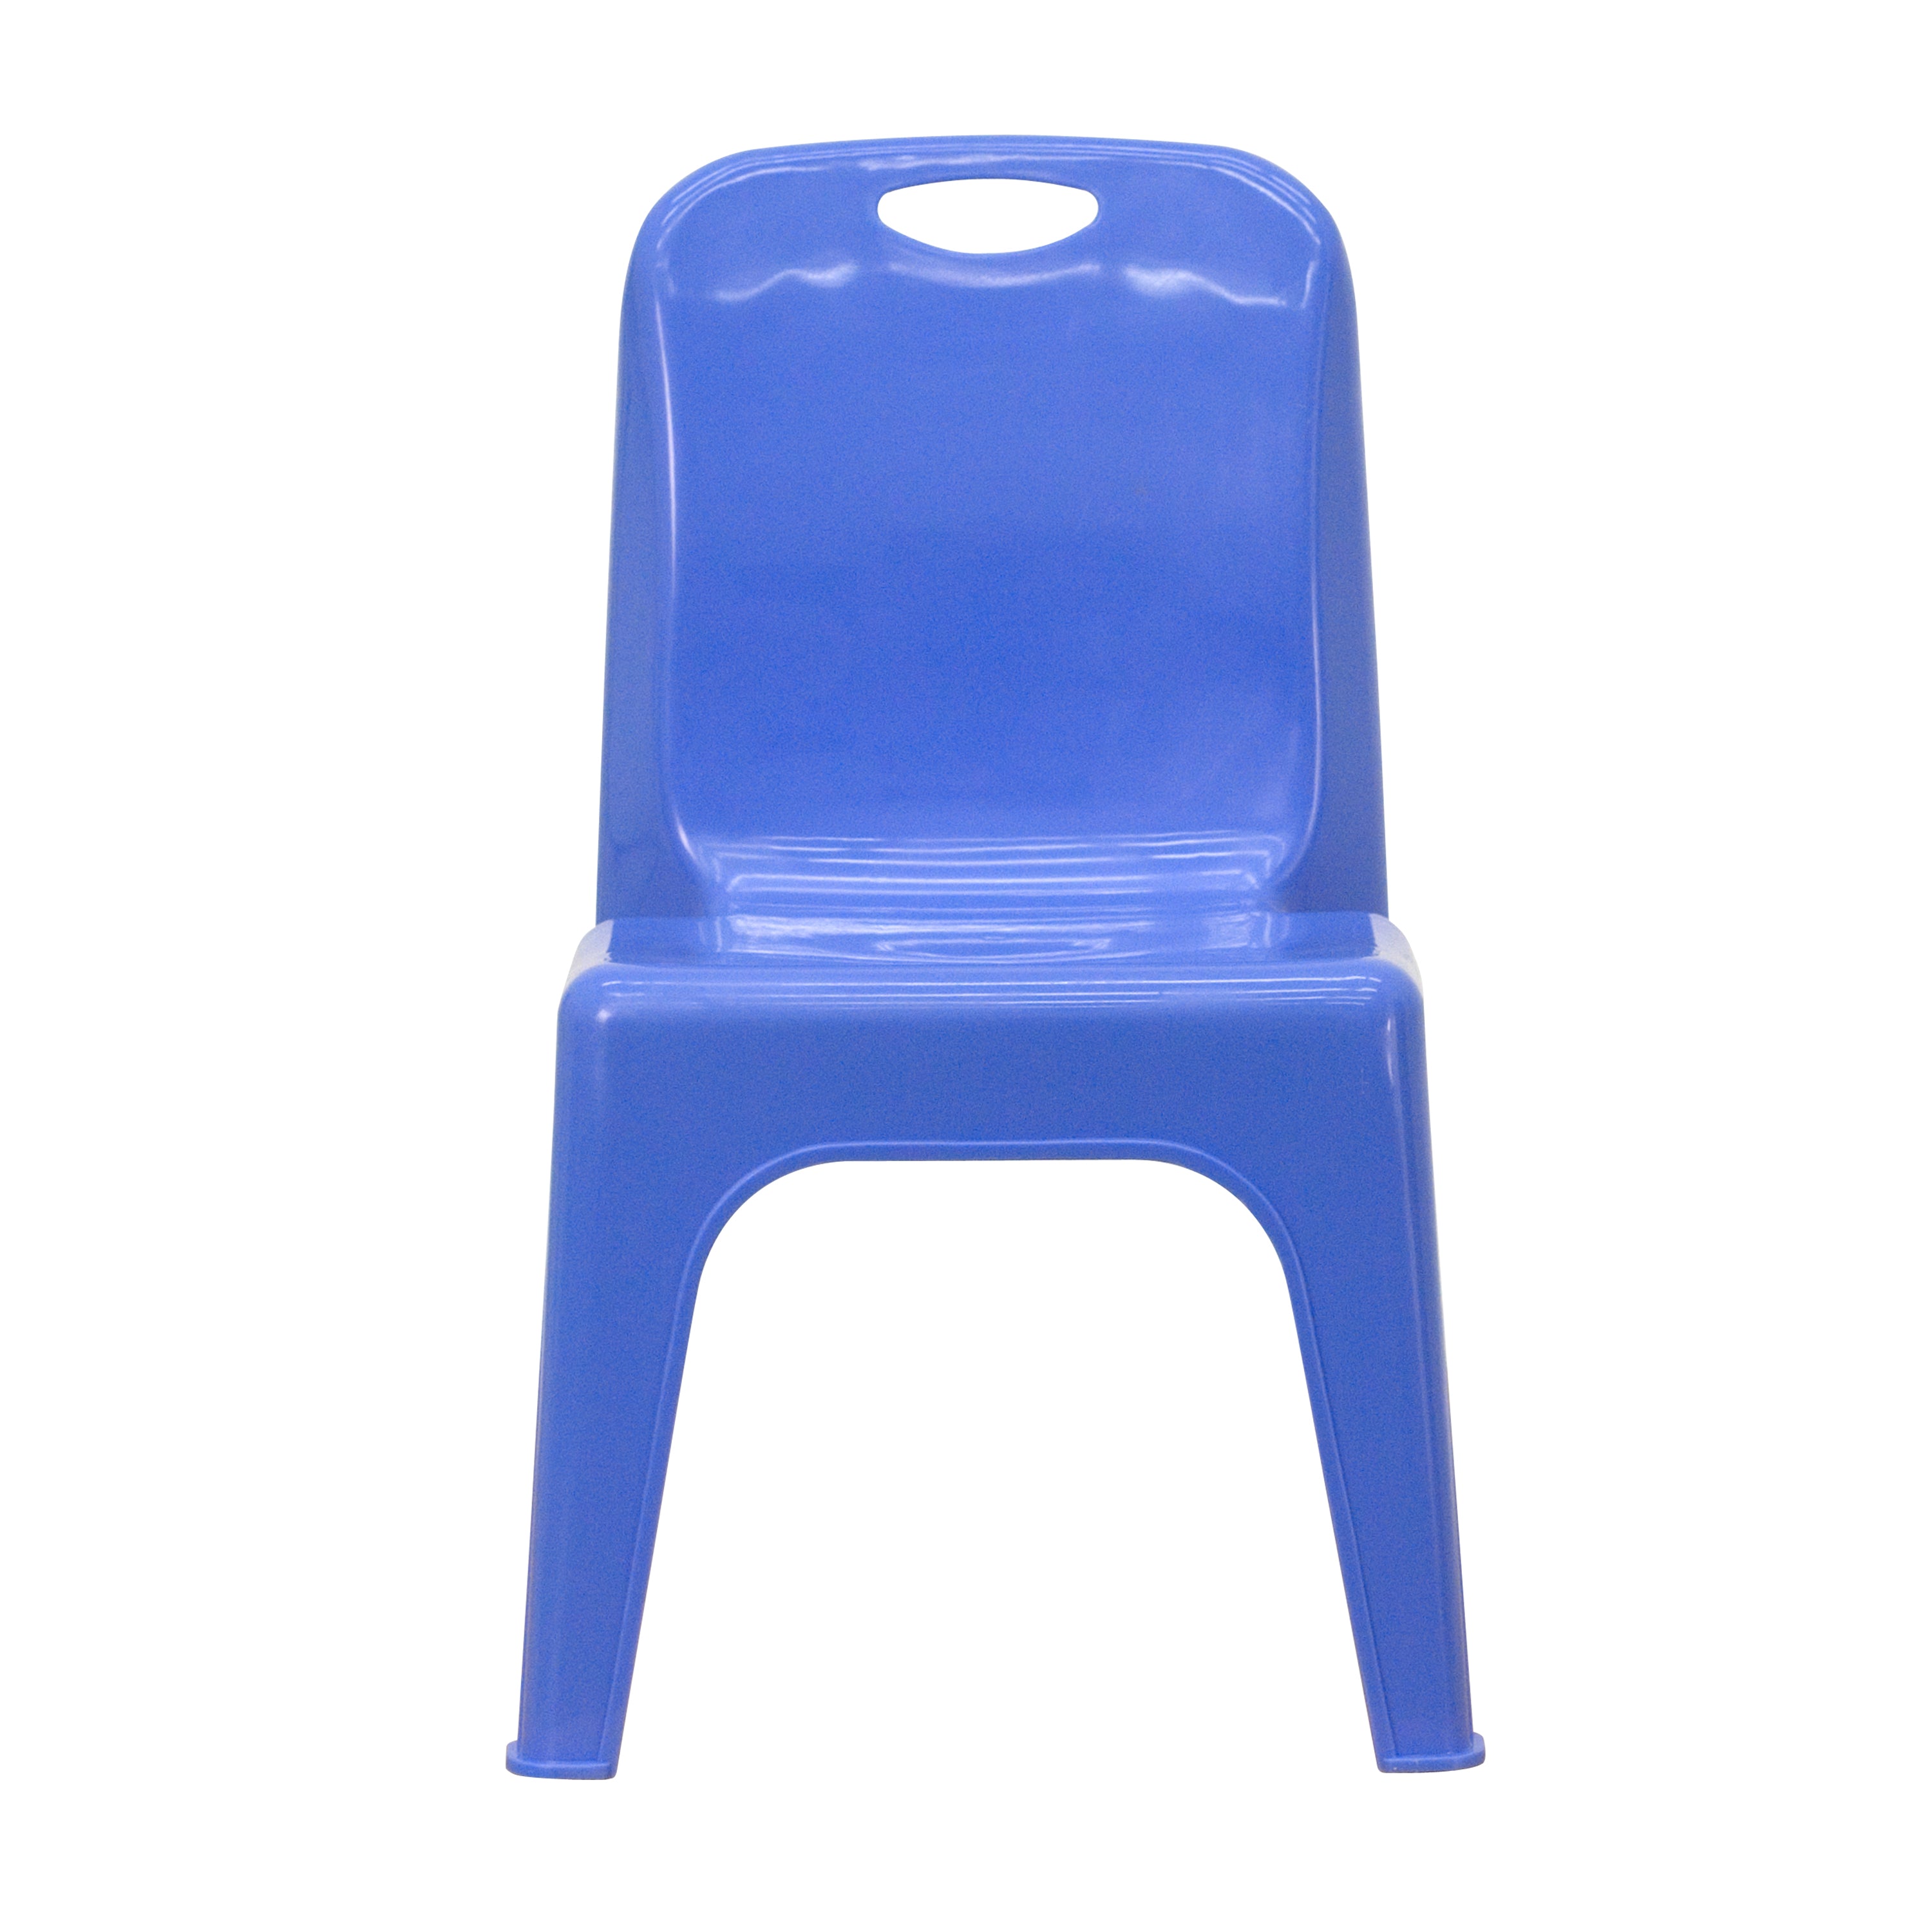 4 Pack Plastic Stackable School Chair with Carrying Handle and 11'' Seat Height-Plastic Stack Chair-Flash Furniture-Wall2Wall Furnishings